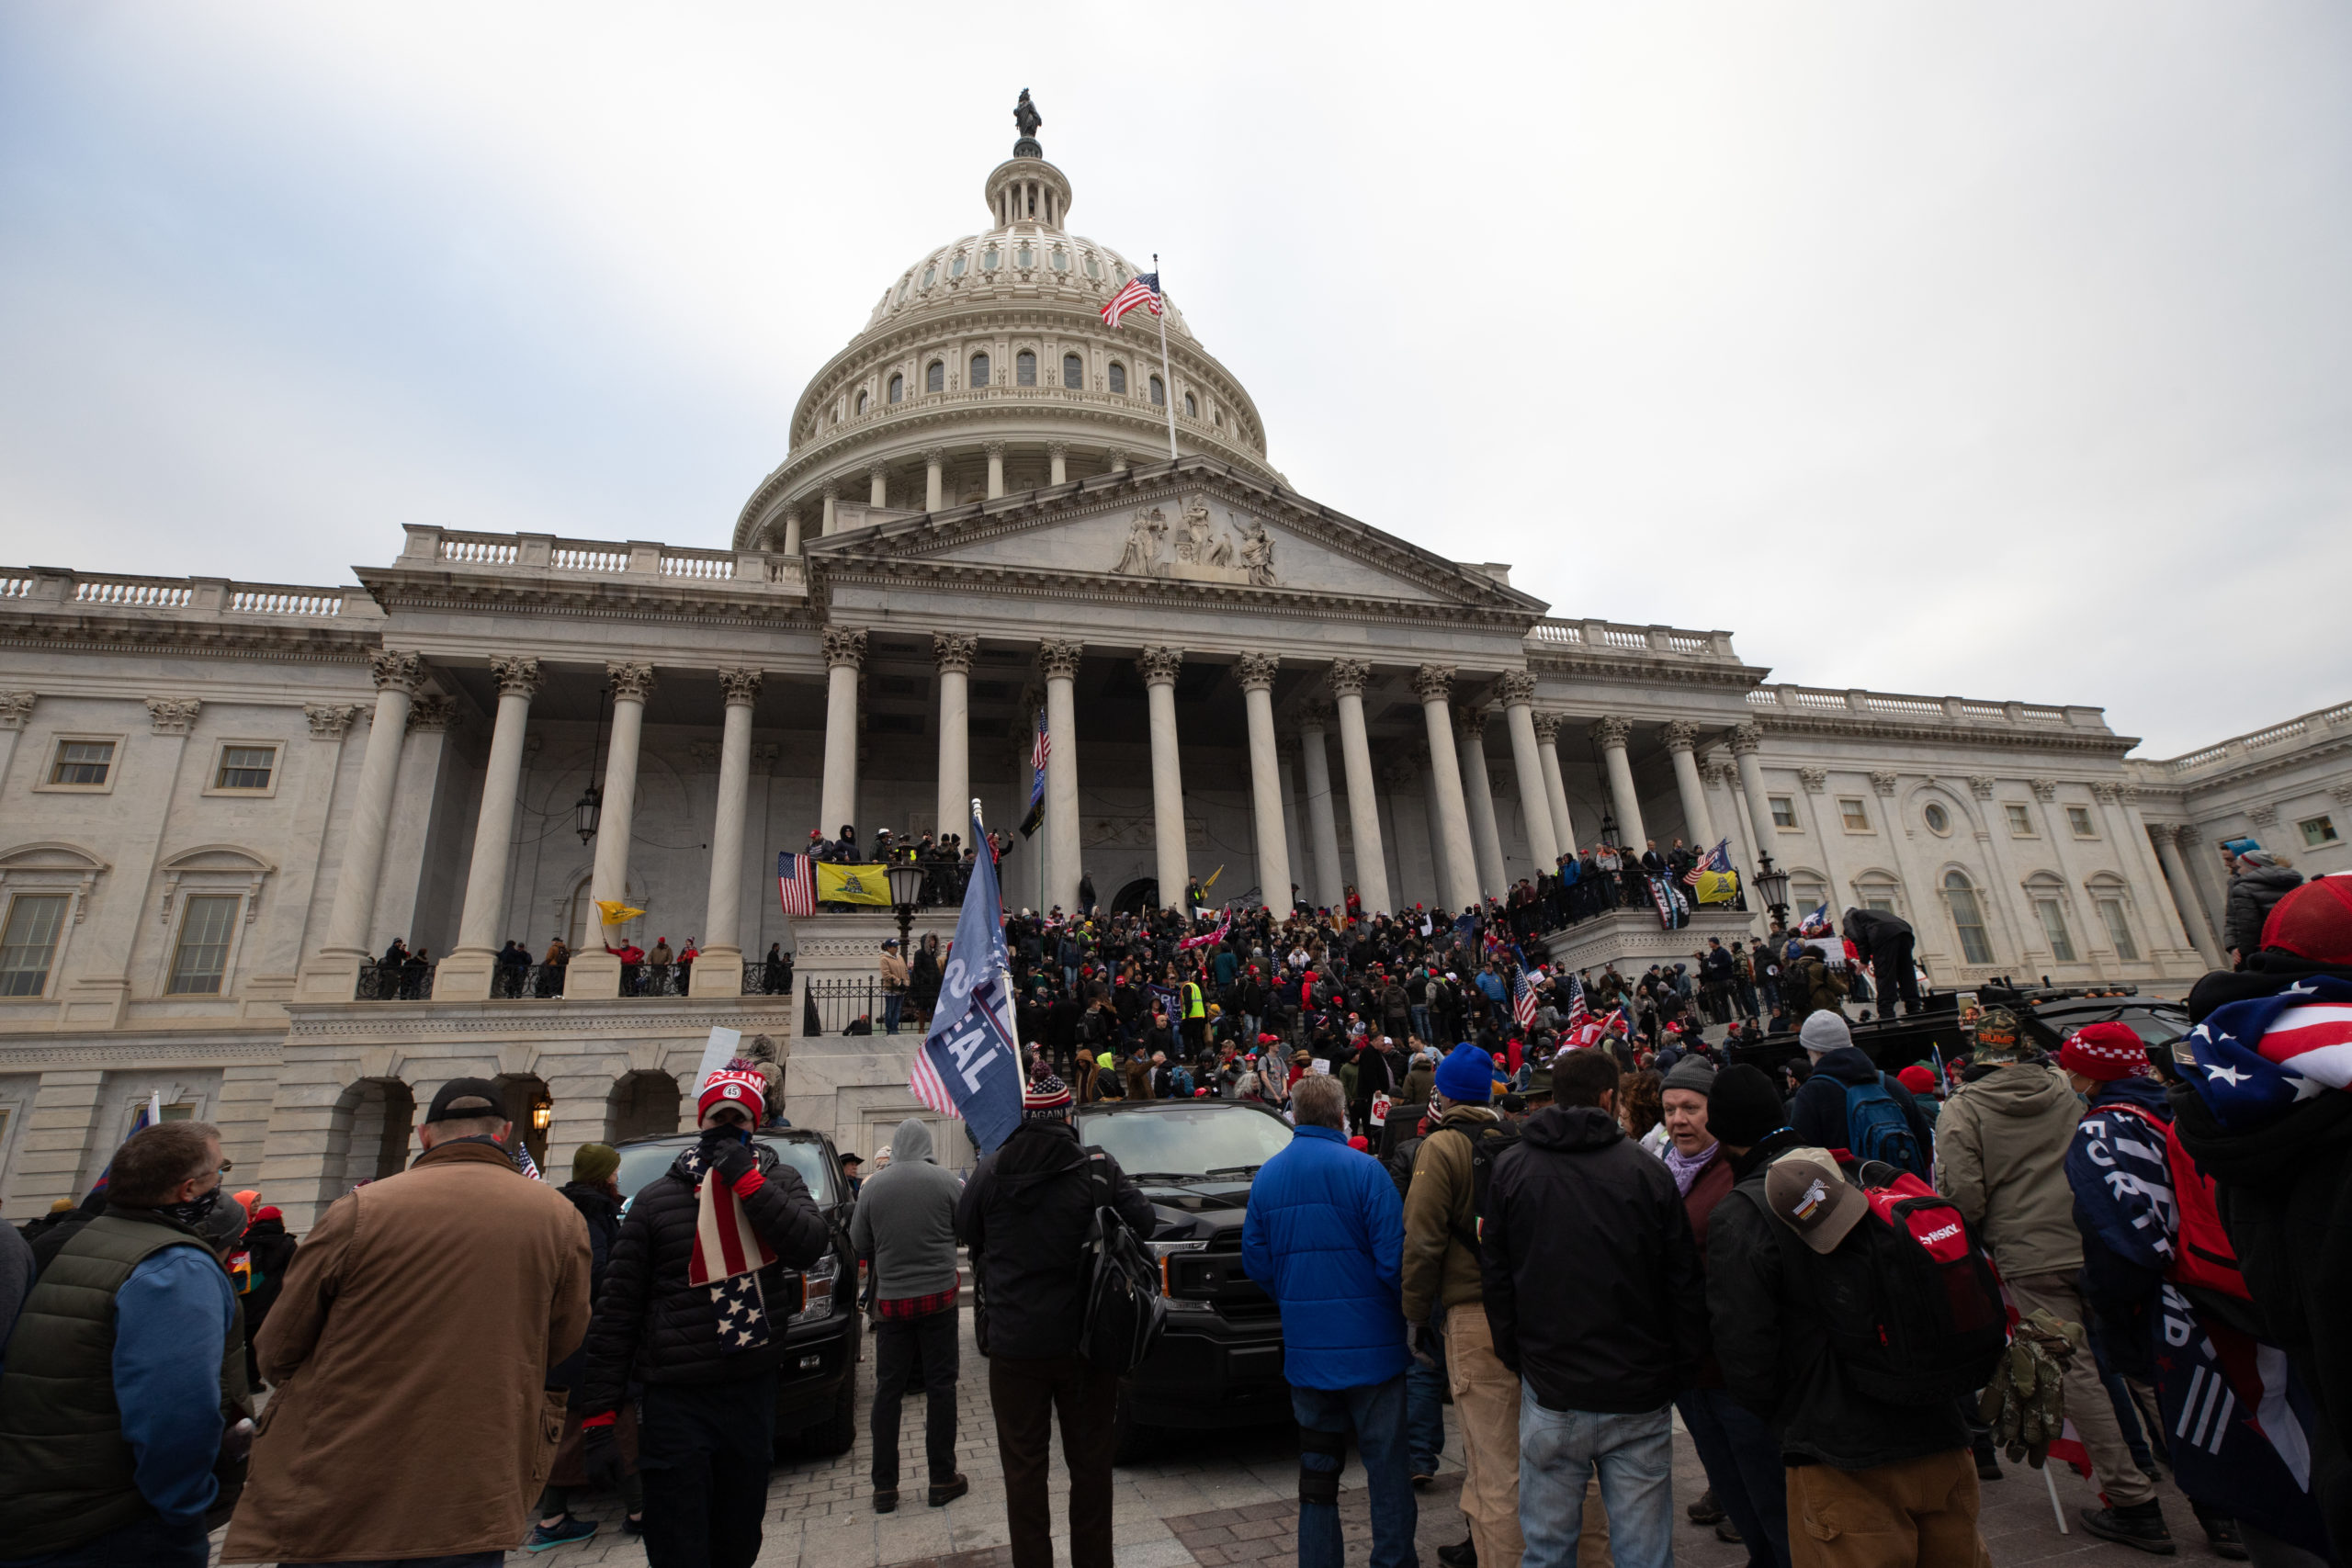 Trump supporters storm the Capitol building in Washington D.C. on Wednesday. (Kaylee Greenlee/Daily Caller News Foundation)